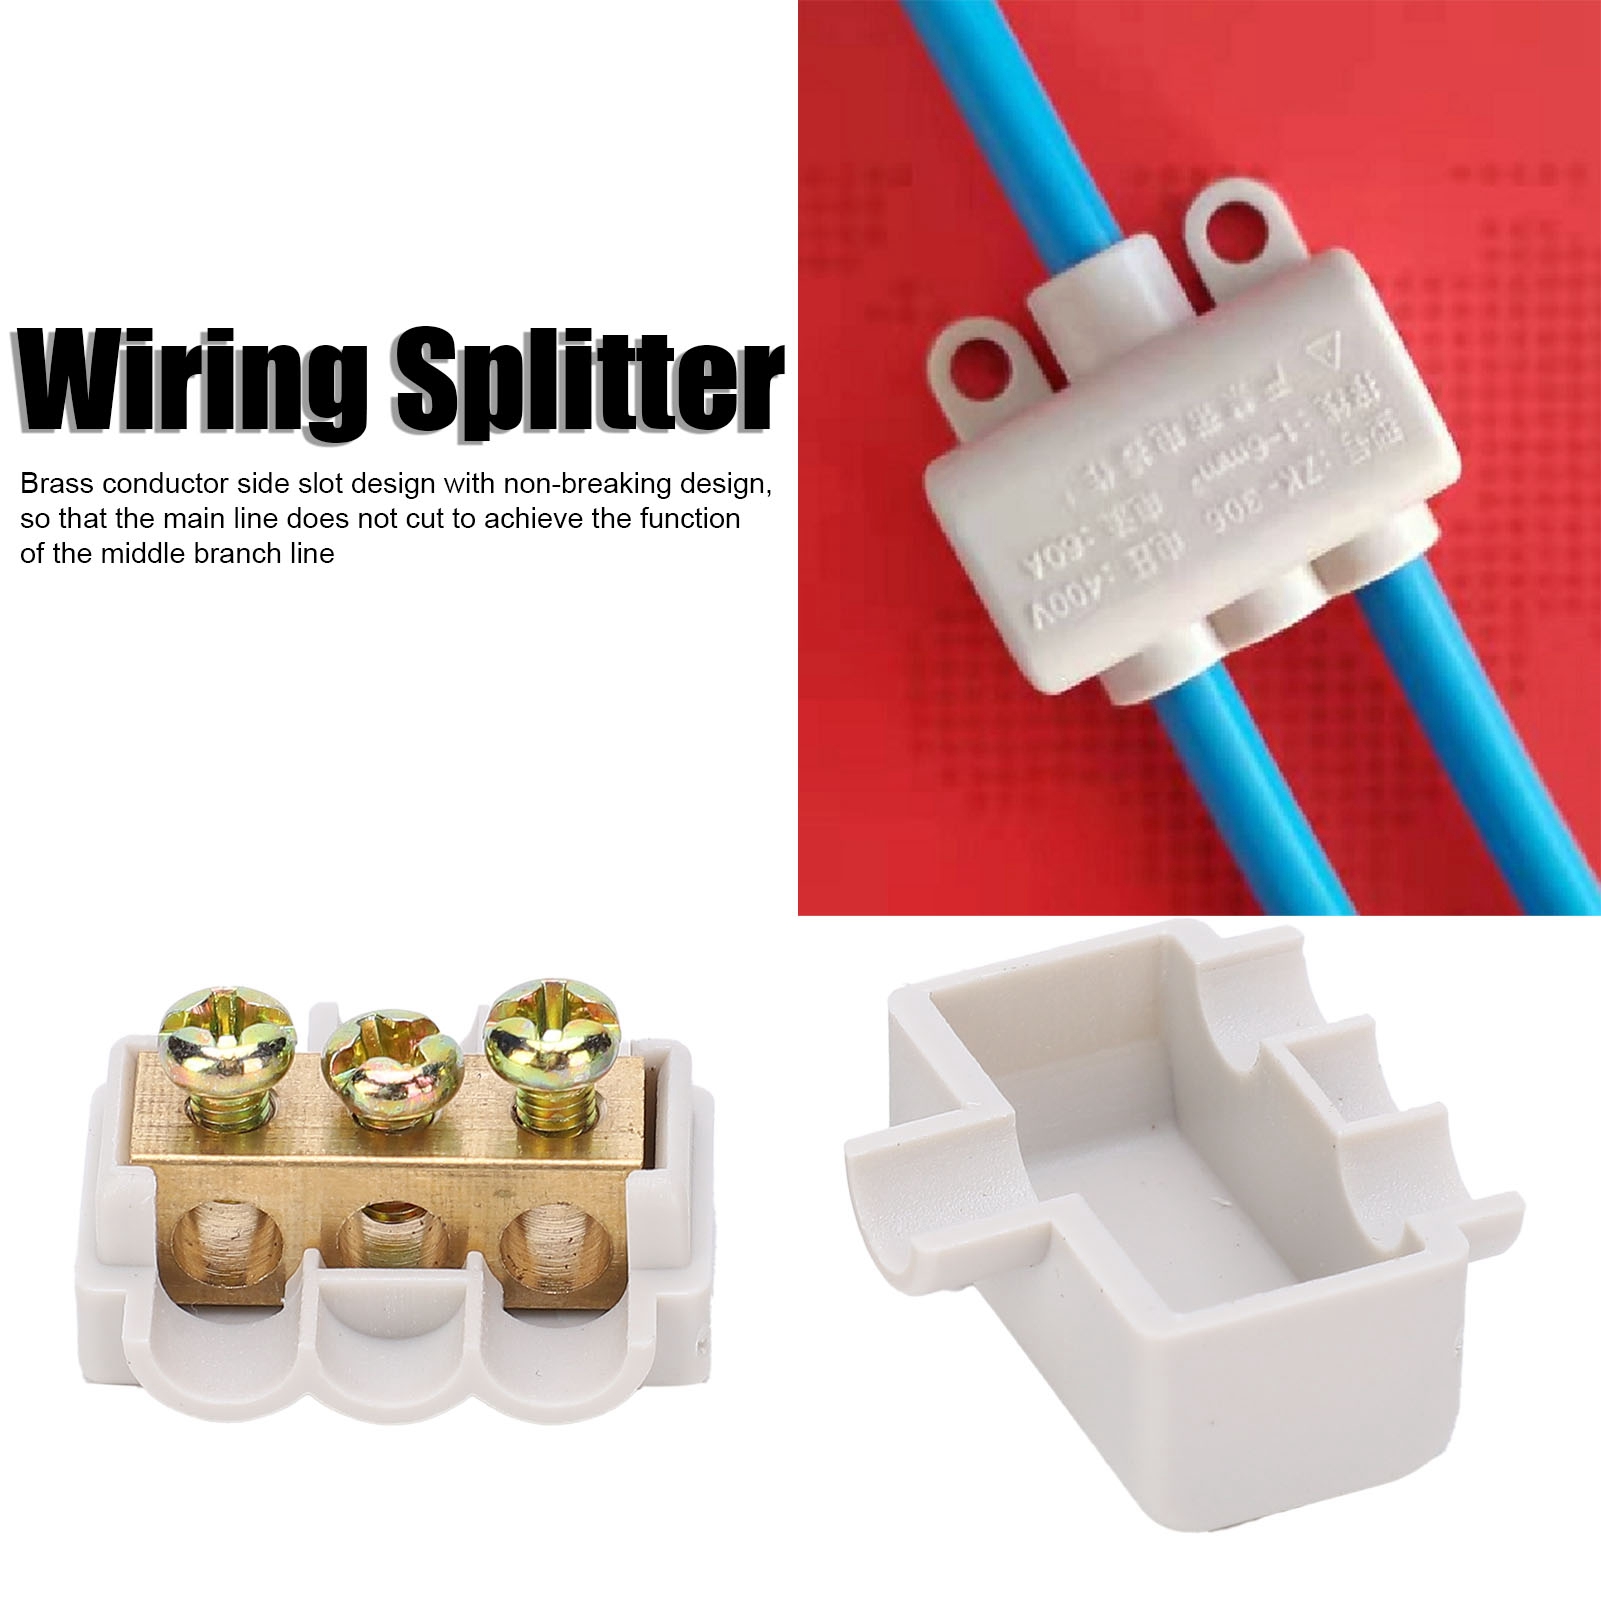 Electric Meter Wiring. ZK-1306 Switch Wiring 5Pcs Terminal Spliter Distribution Block Copper Junction Connector Box for Ceiling Light Wiring 